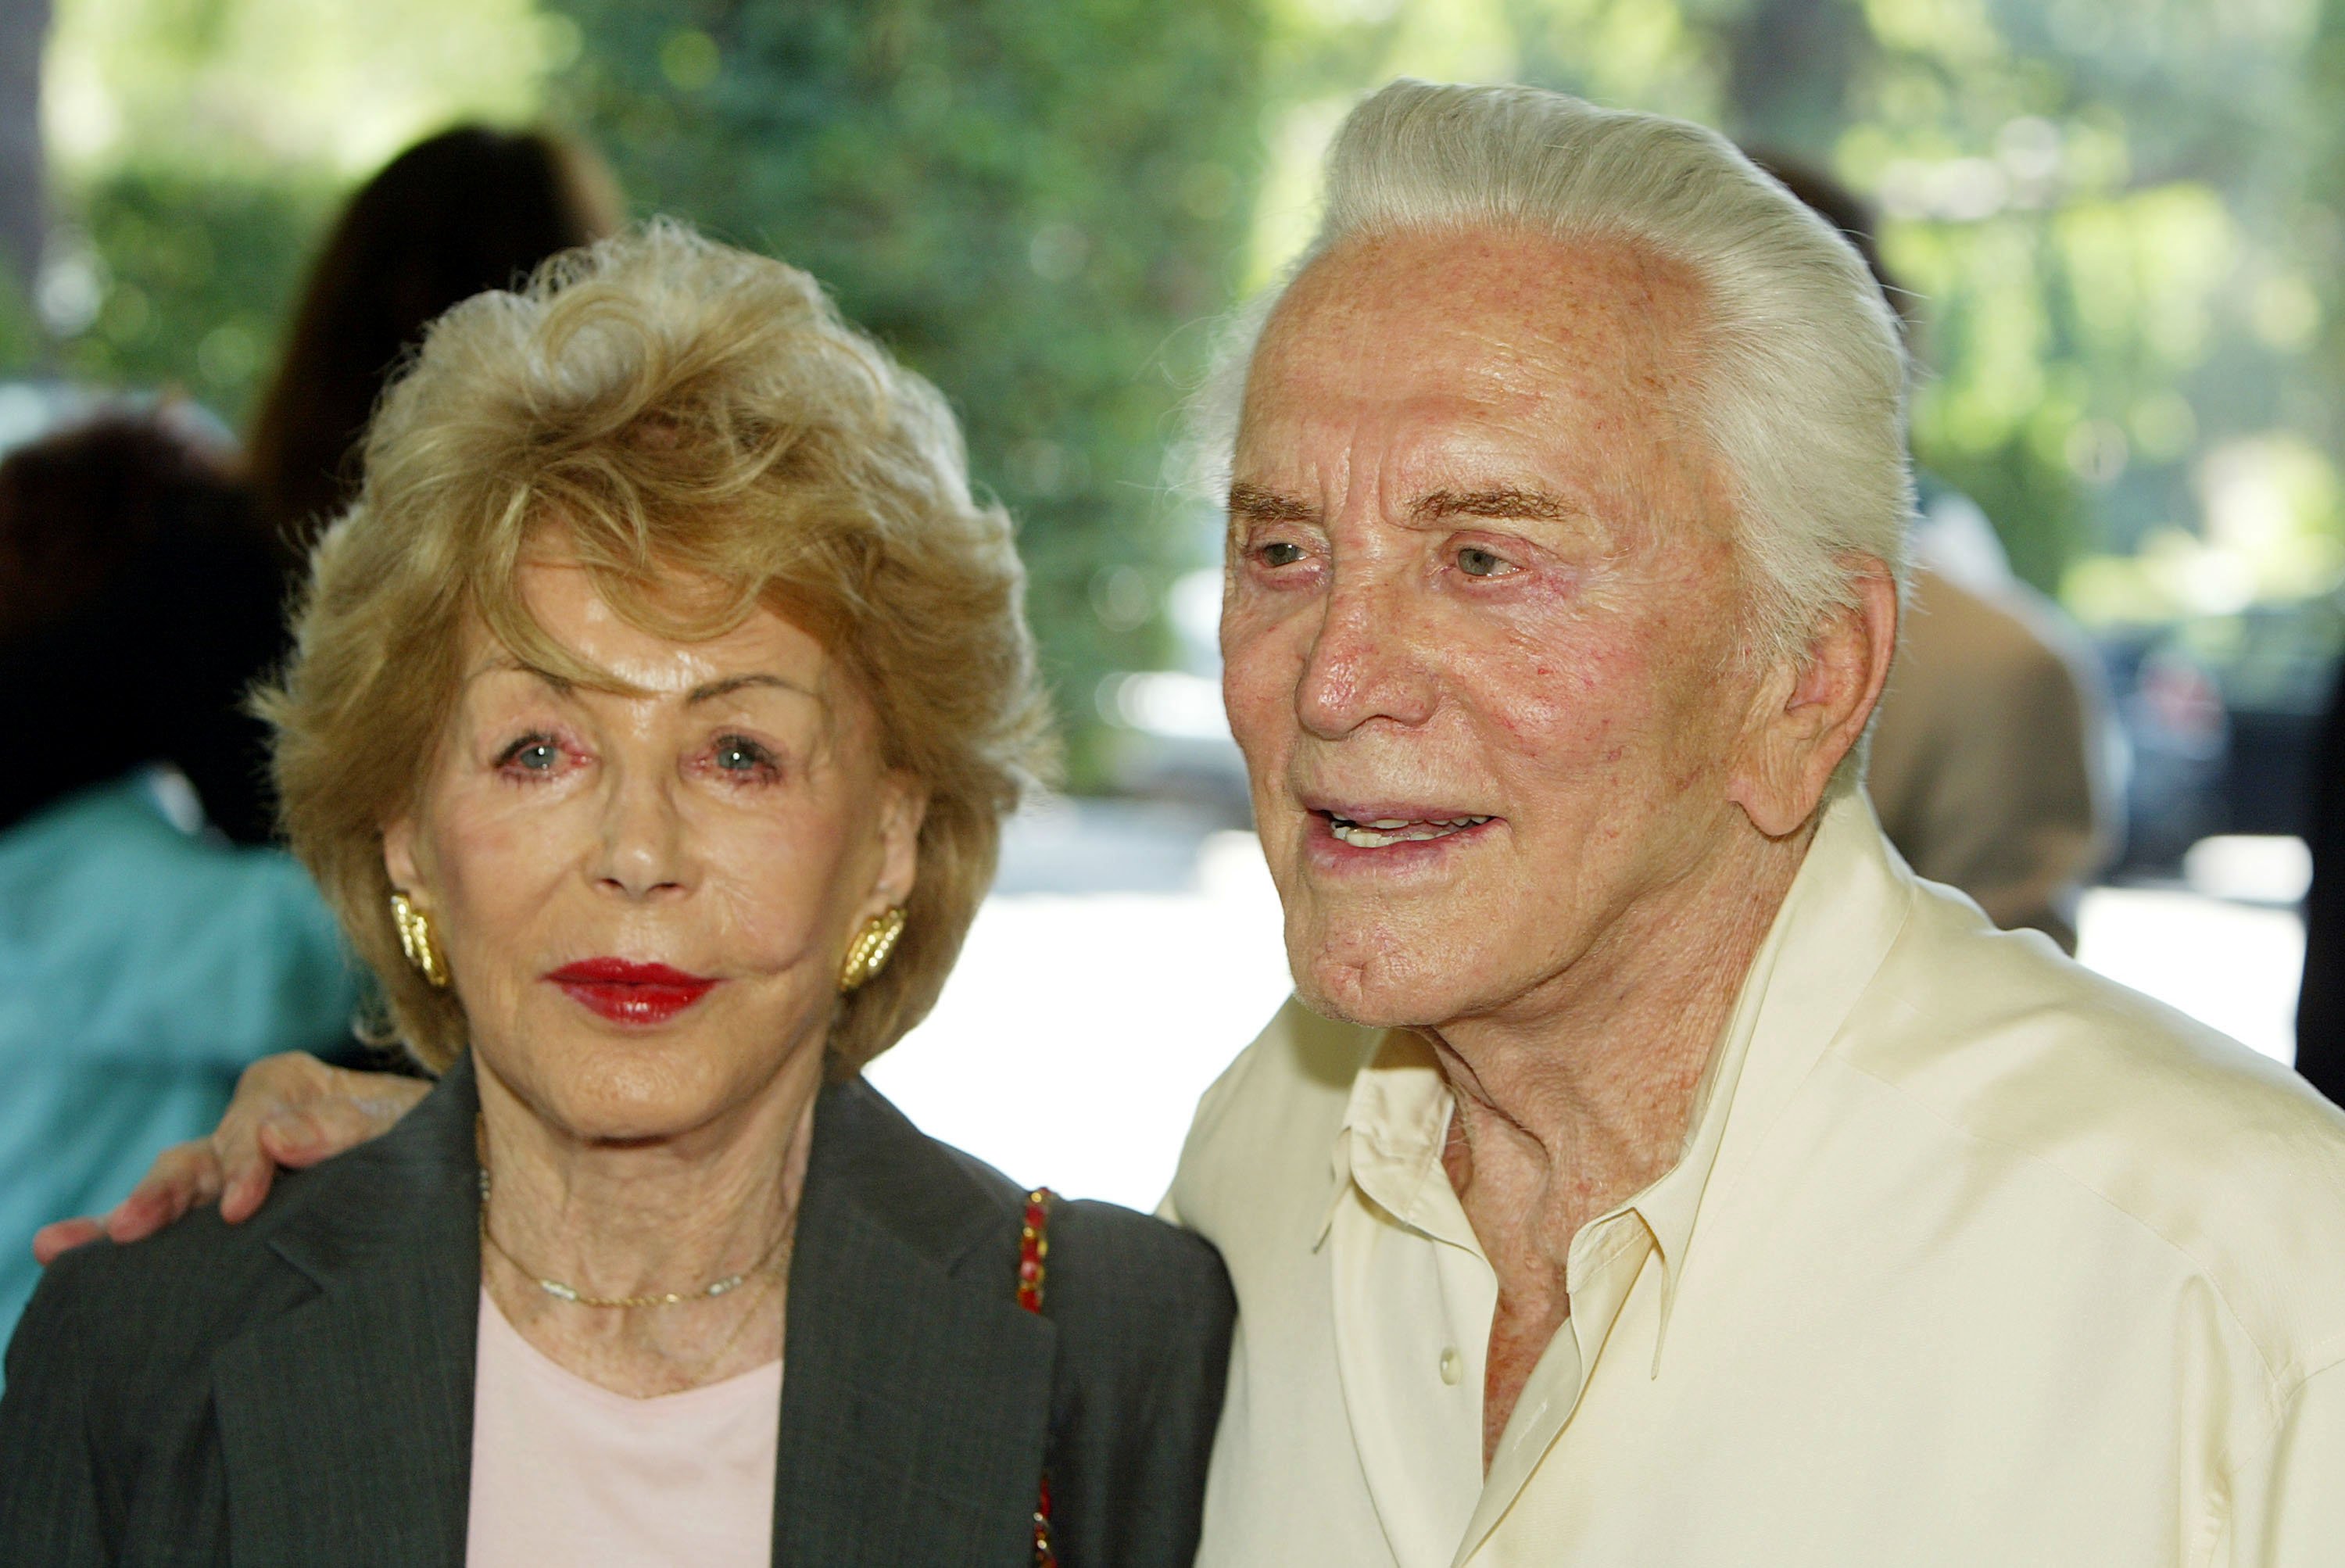 Anne Buyden and Kirk Douglas in Beverley Hills 2004. | Source: Getty Images